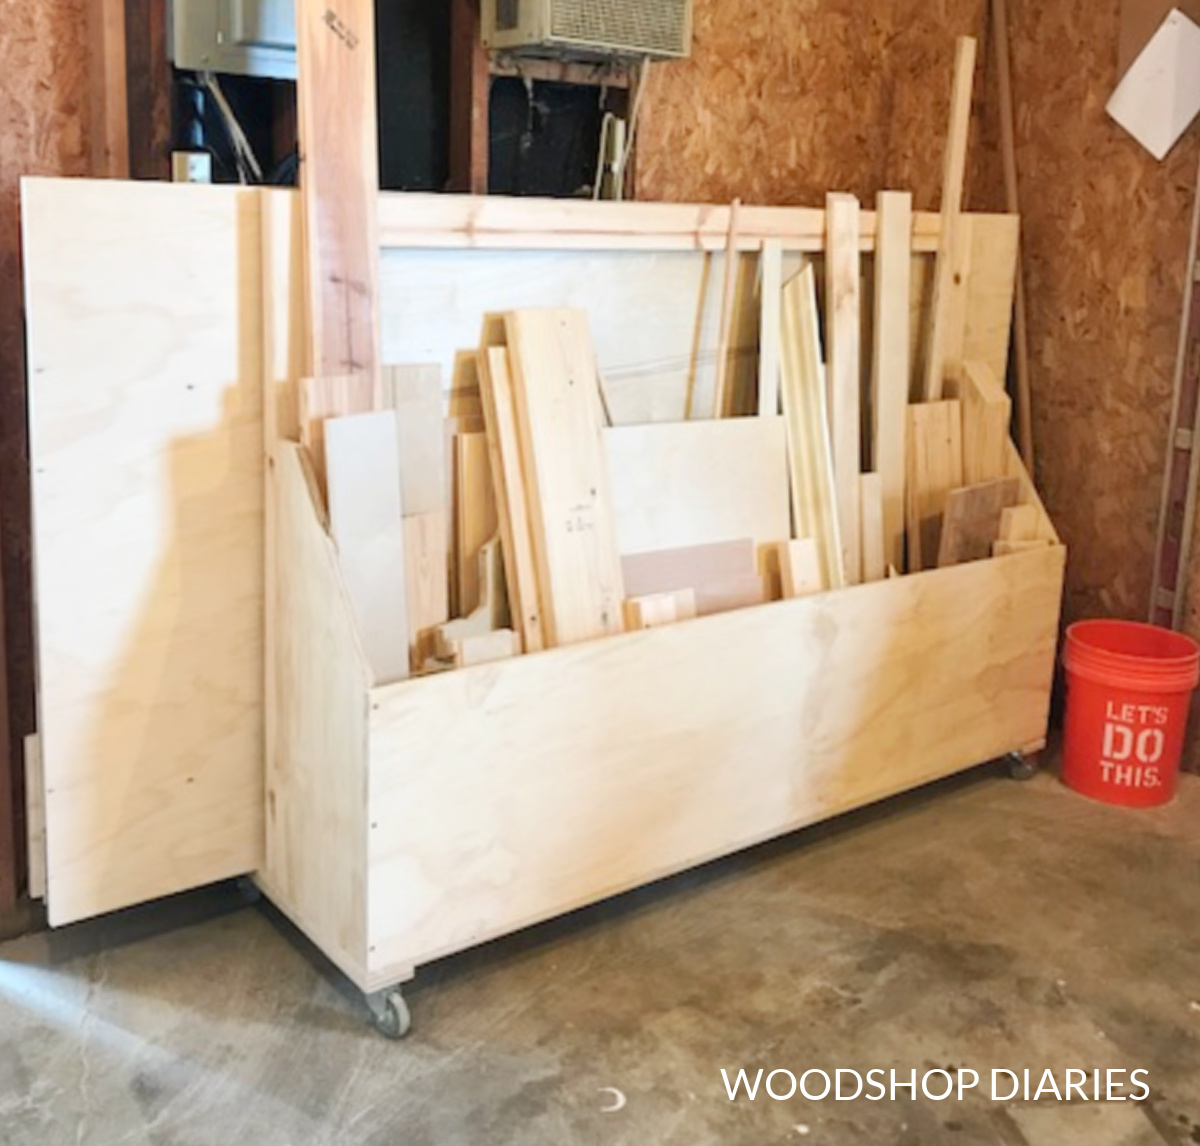 DIY mobile plywood and scrap wood storage cart loaded up with lumber in workshop